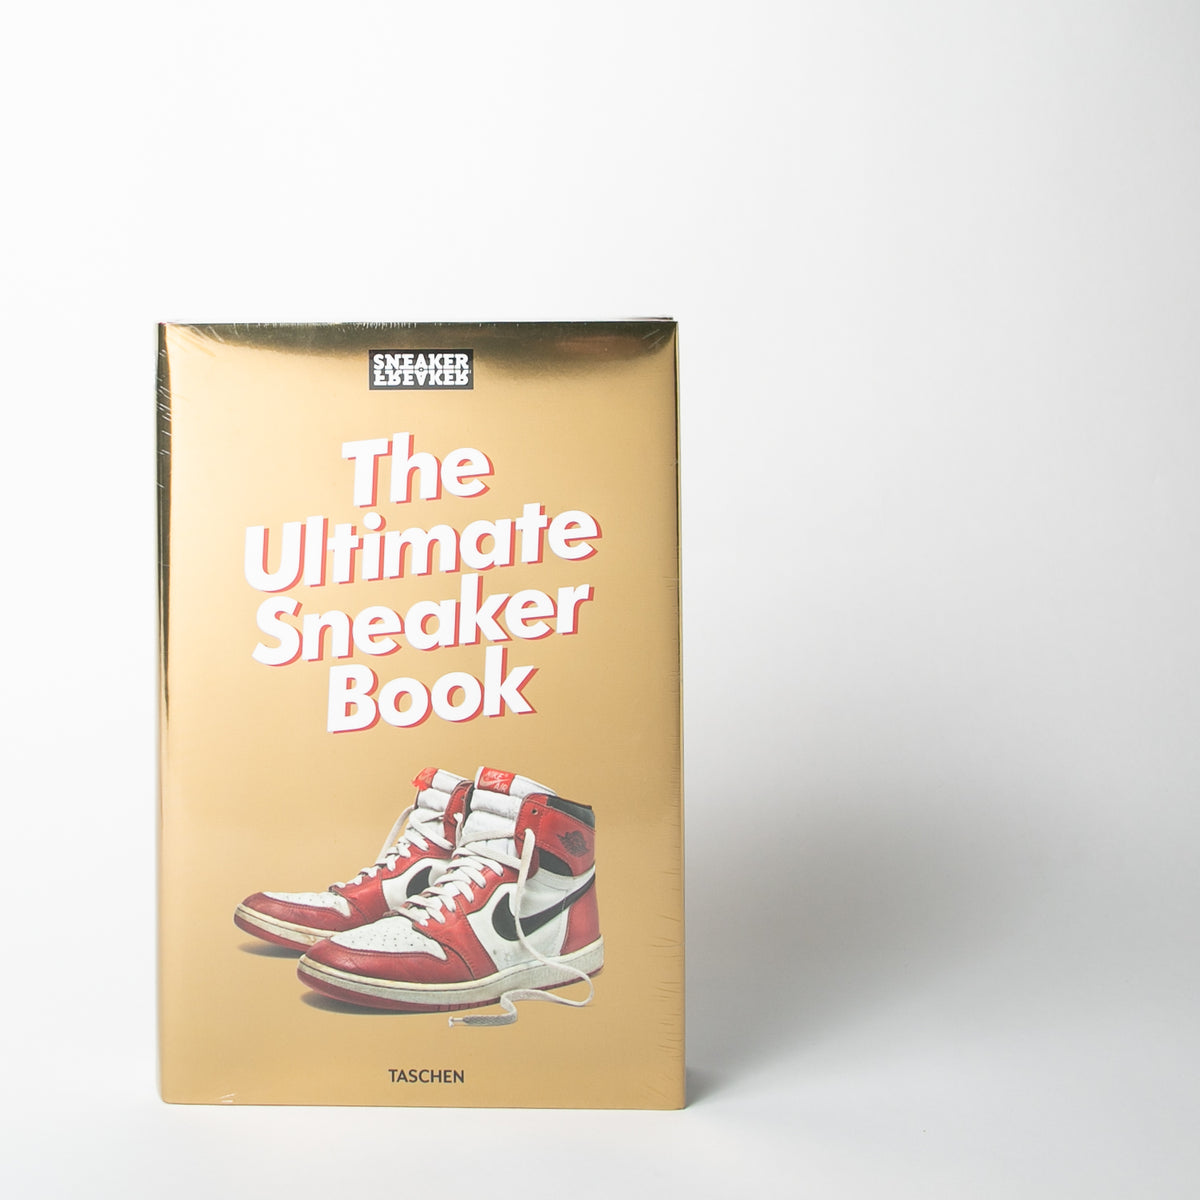 Sneaker Freaker: The ultimate sneaker book by Taschen at Secret Location Concept Store